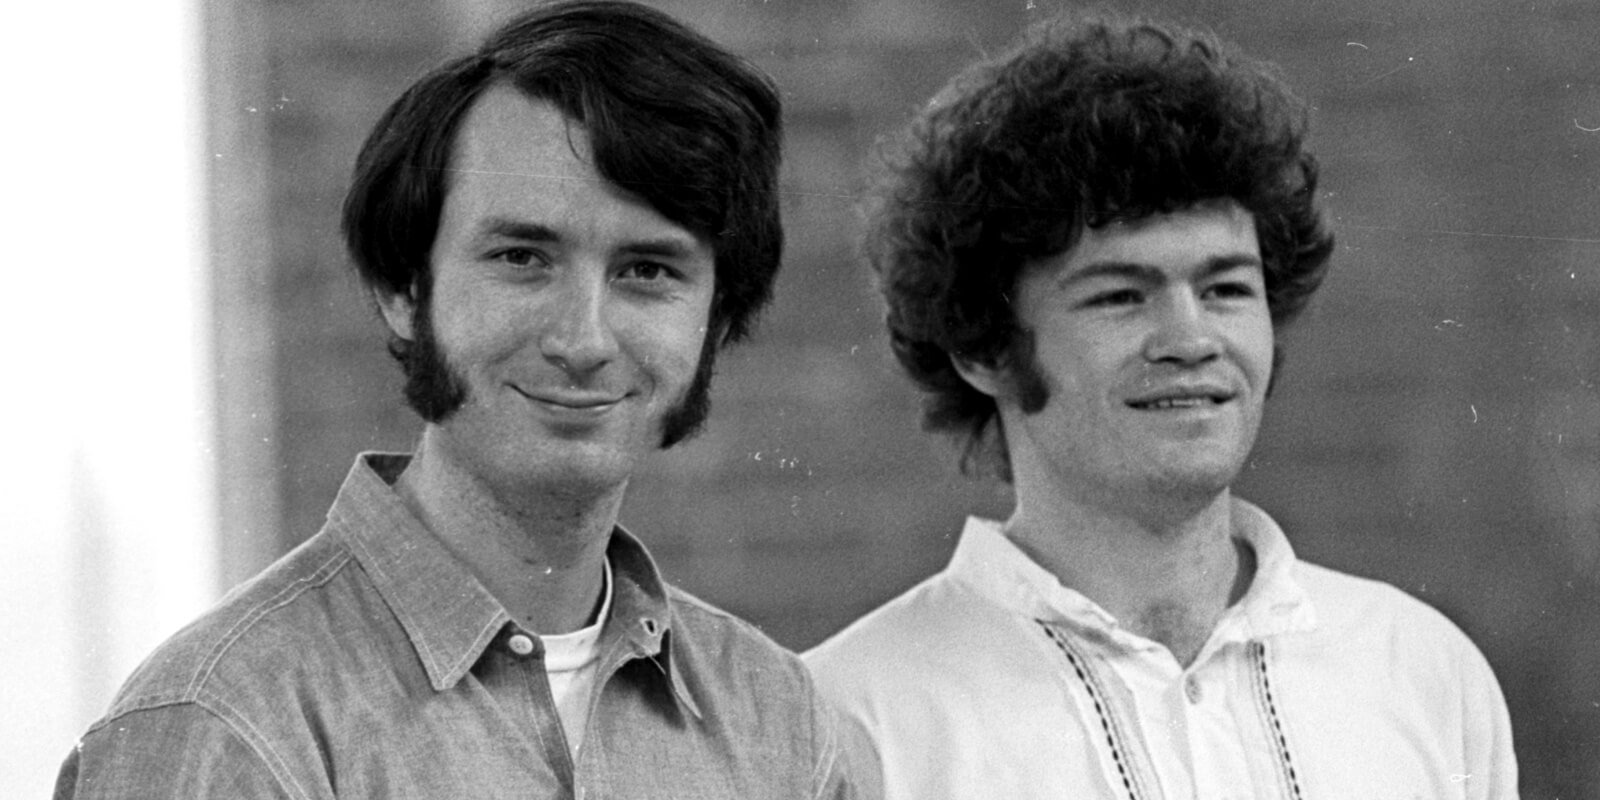 Mike Nesmith and Micky Dolenz pose together for a photograph in the late 1960s.